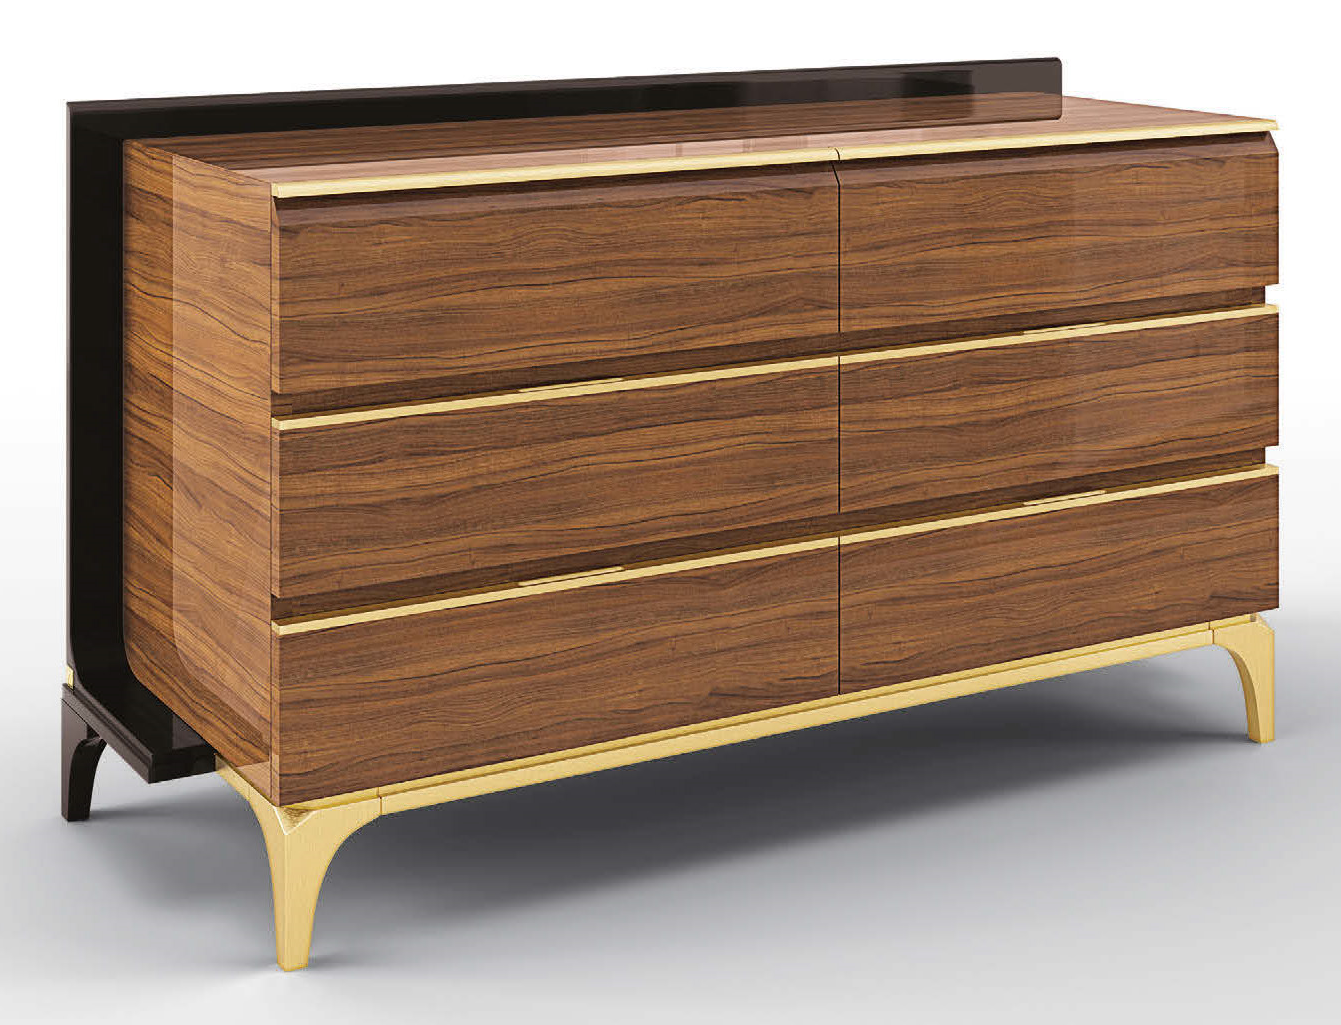 Chest of Drawers Elegant Smooth and Savy Chest Of Drawers